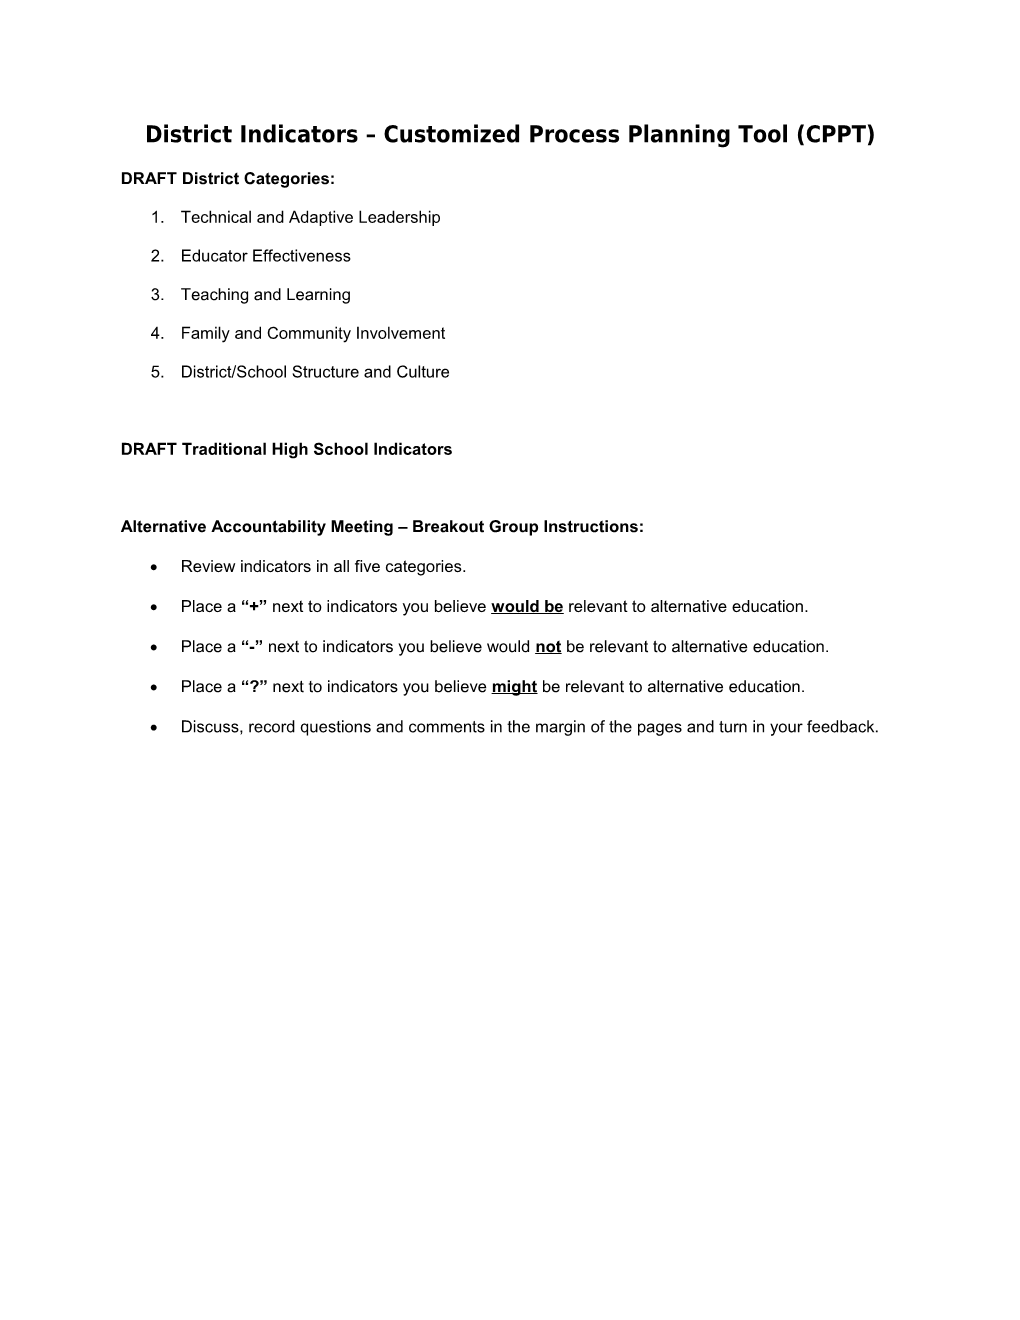 District Indicators Customized Process Planning Tool (CPPT)